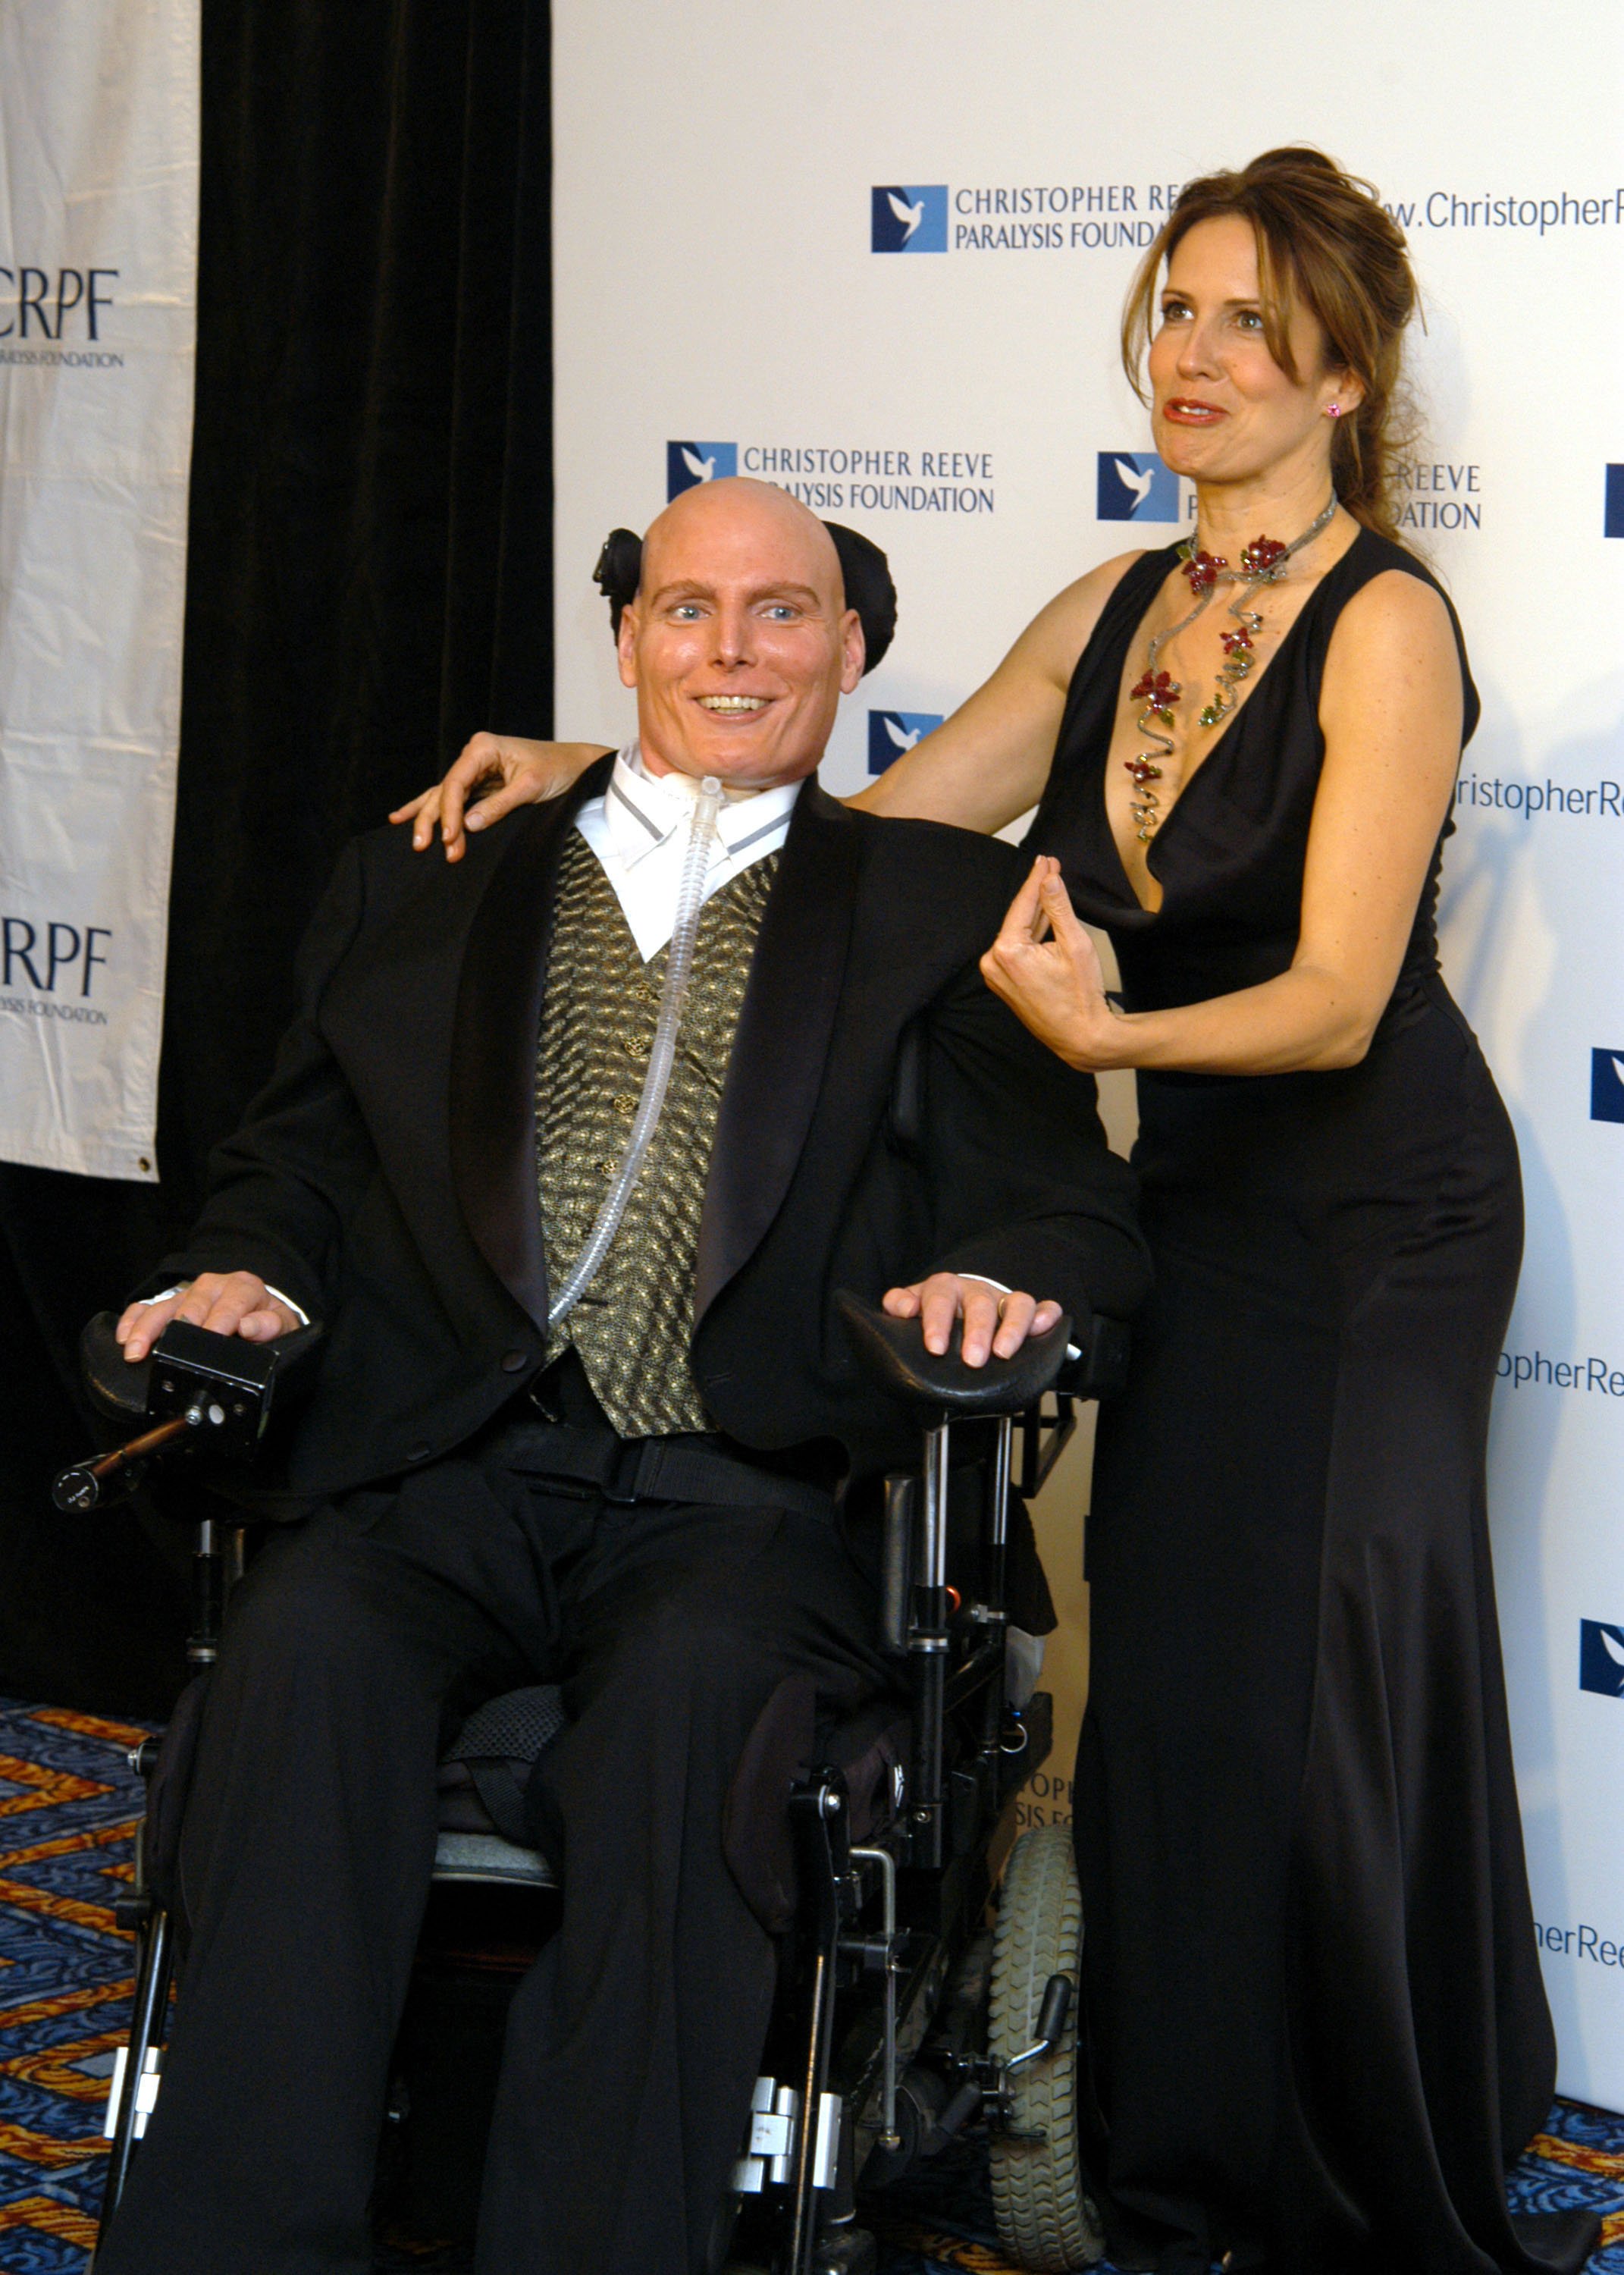 Christopher Reeve and Dana Reeve during 13th Annual "A Magical Evening" Gala Hosted by The Christopher Reeve Paralysis Foundation at Marriot Marquis in New York City, New York, United States. | Source: Getty Images